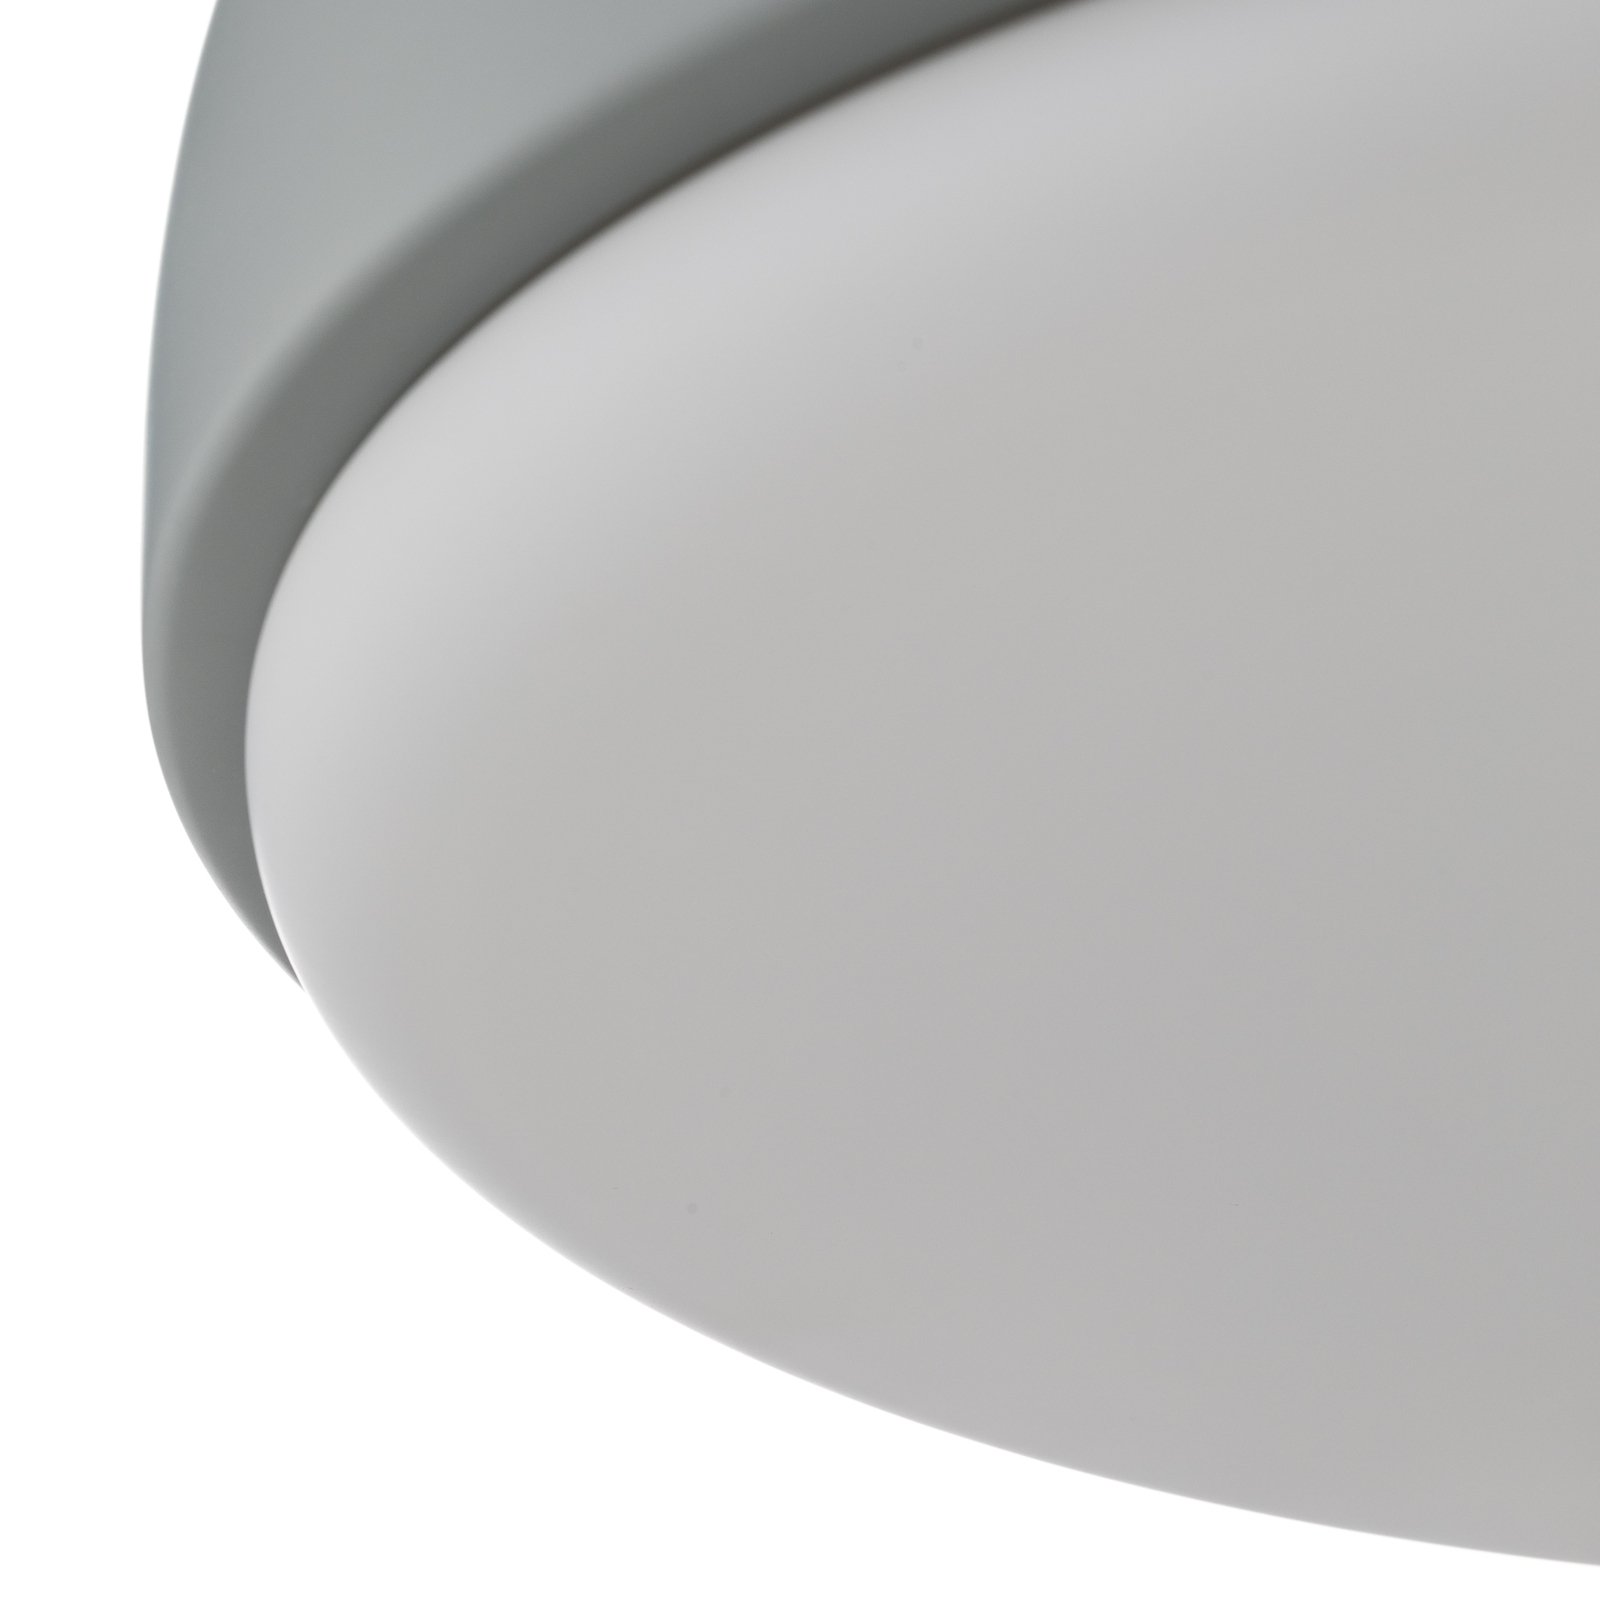 Northern Over Me ceiling light, pale blue 40 cm